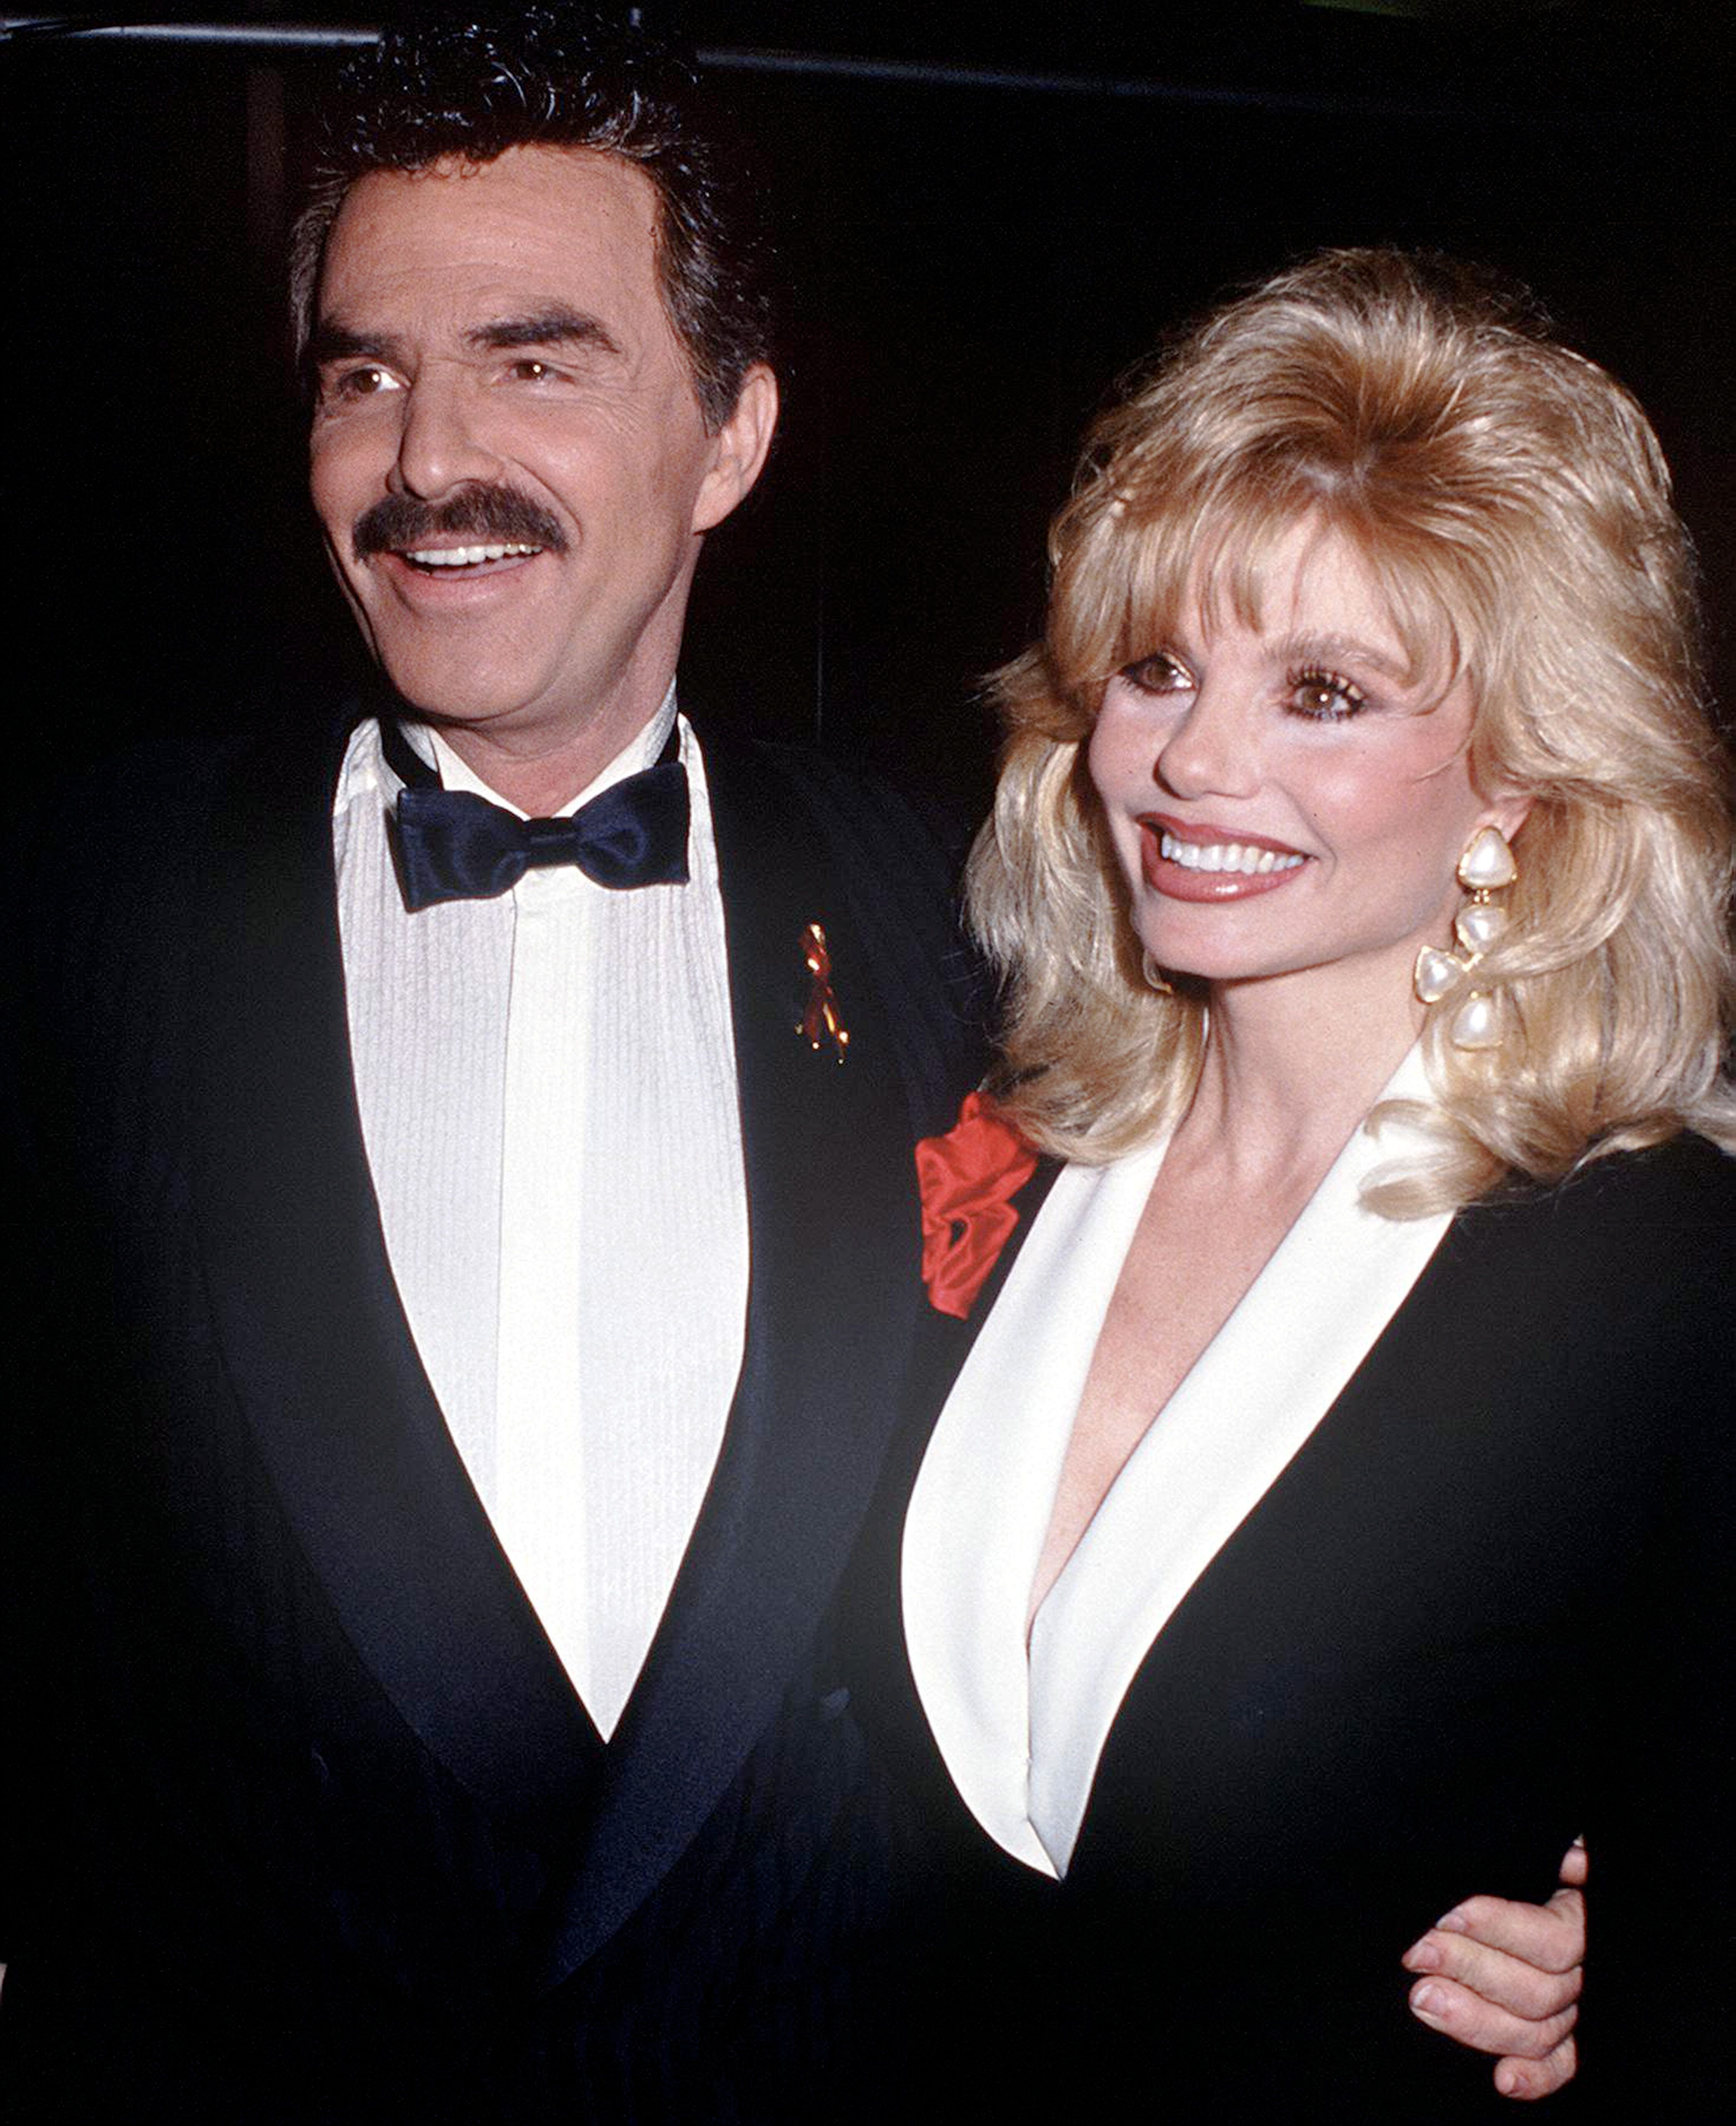 Burt Reynolds with his wife, actress Loni Anderson. | Source: Getty Images